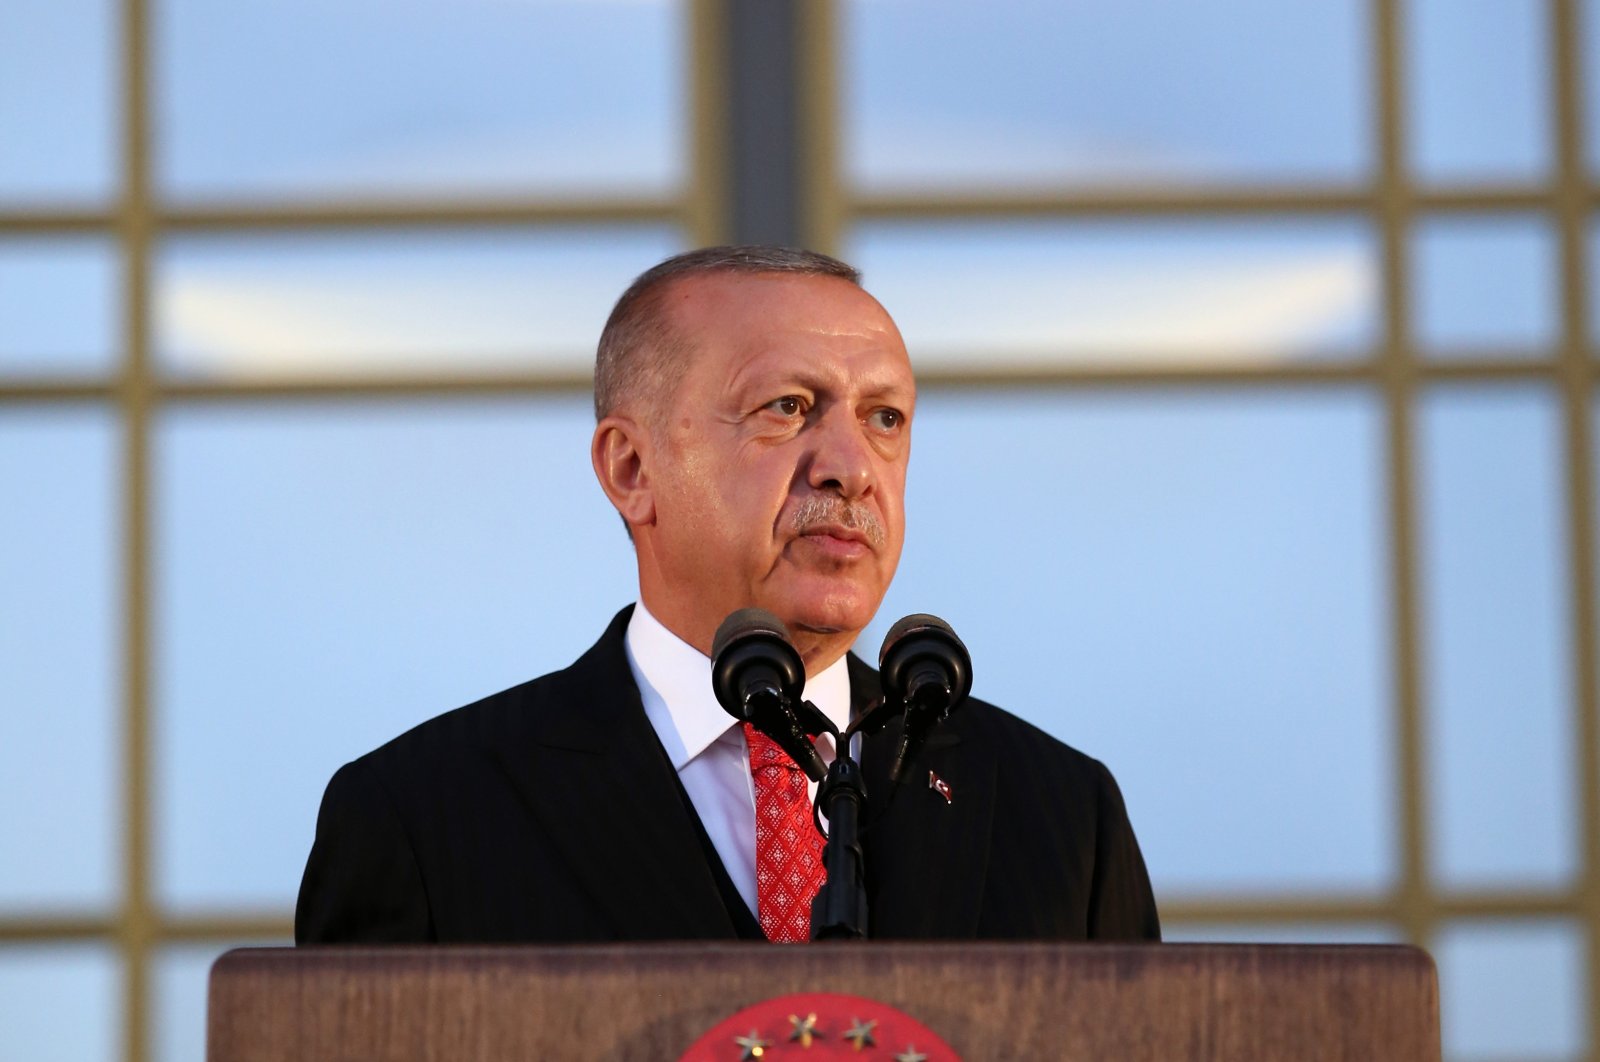 EU cannot be center of power without Turkey, Erdoğan says ...